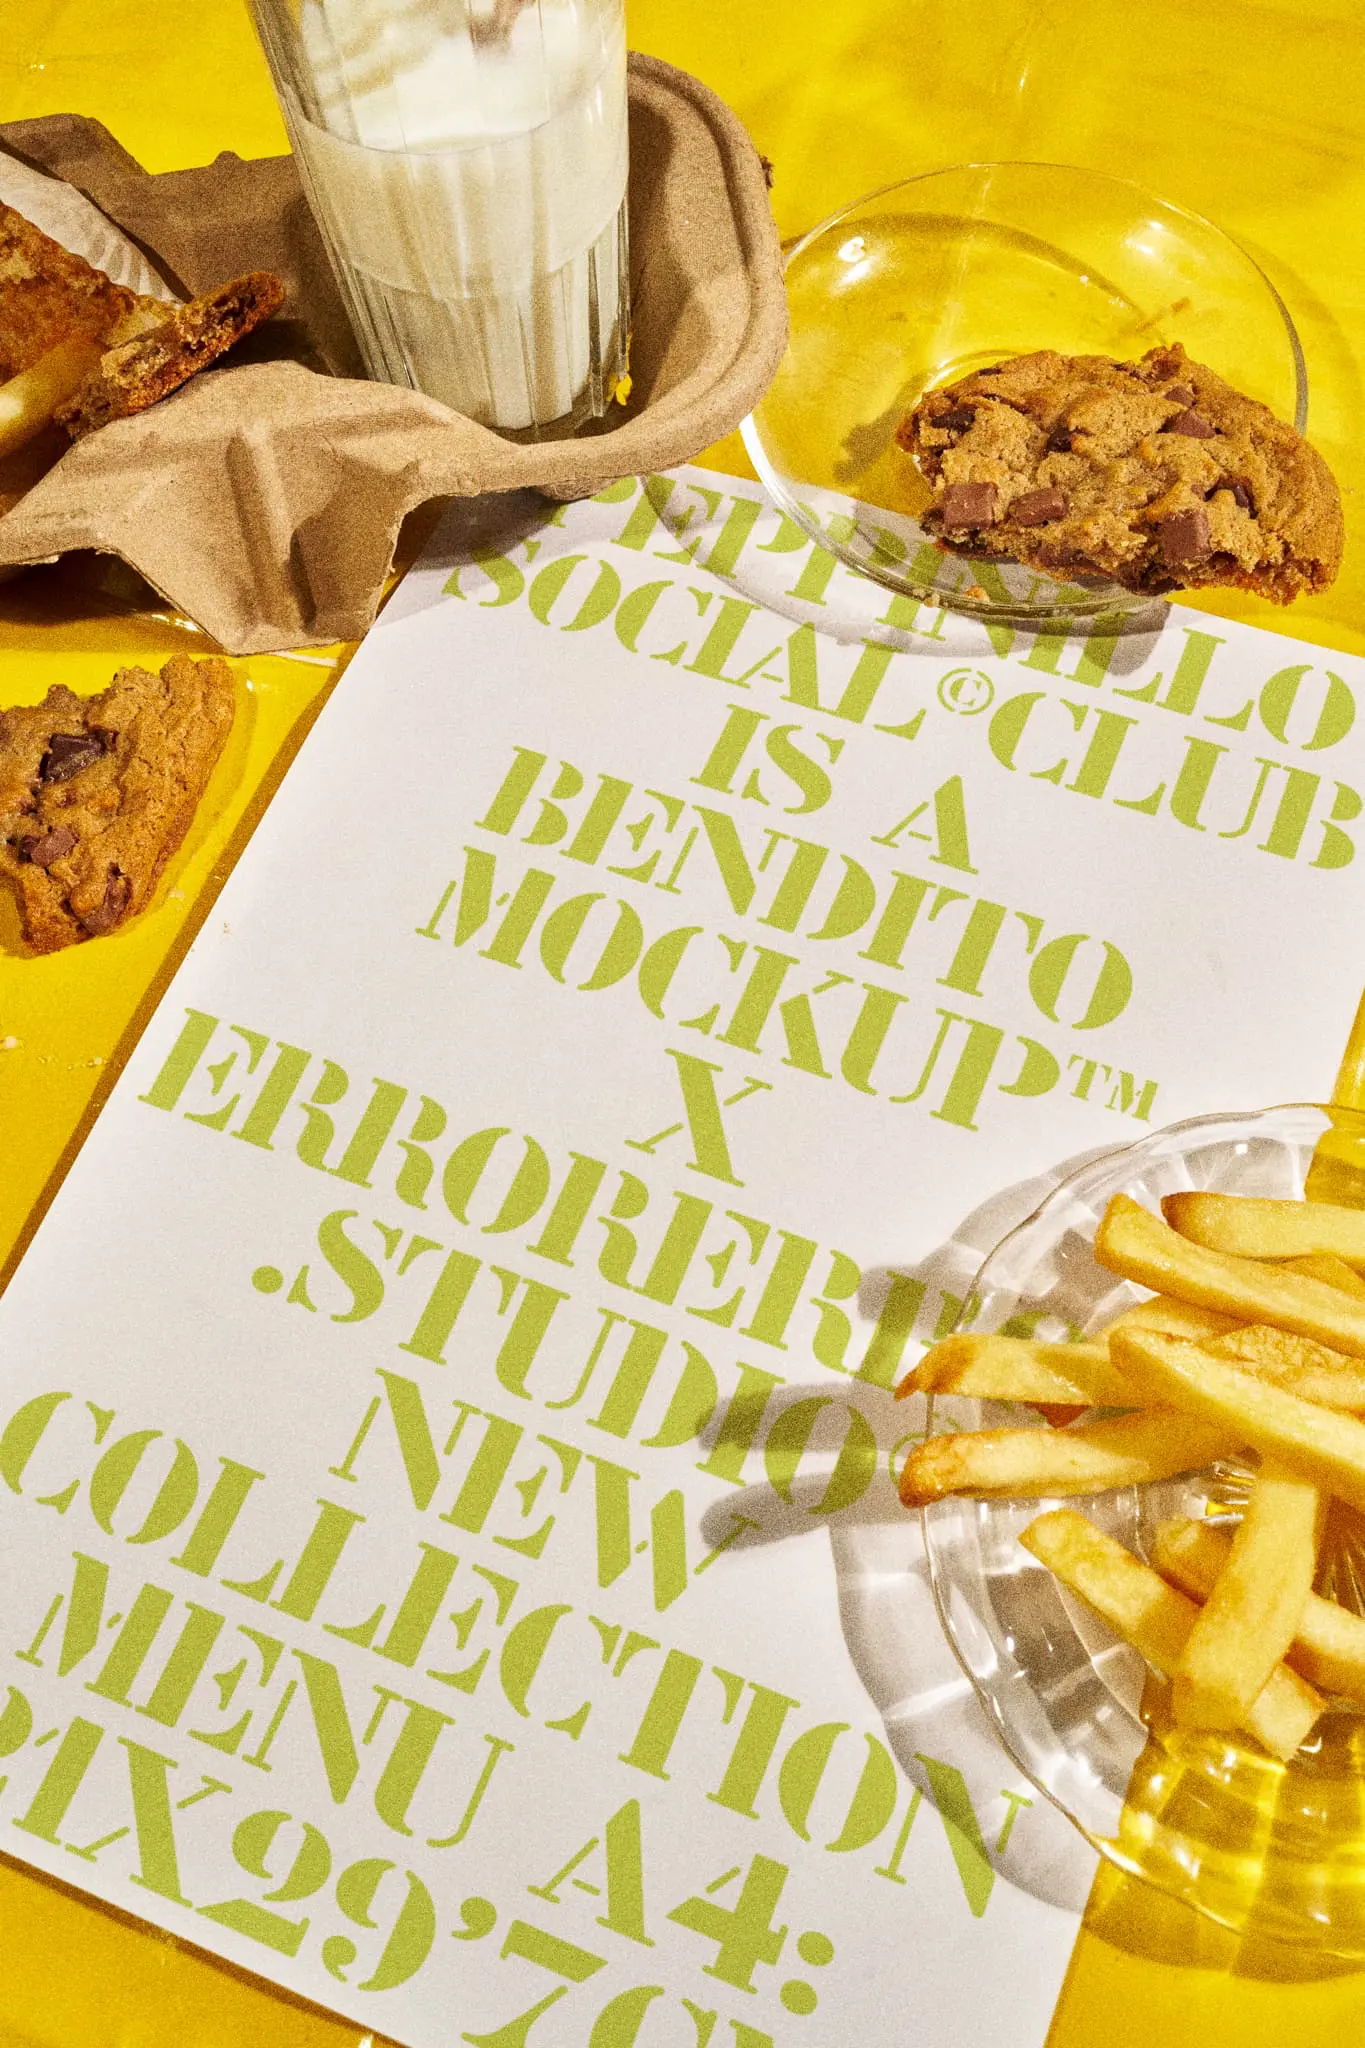 Menu mockup on top of a restaurant table with a yellow tablecloth together with a glass of milk, a cookie and fries. A Format mockup. Restaurant menu PSD file. Print mockup. High-quality menu mockup. A Format PSD high-quality editable file.